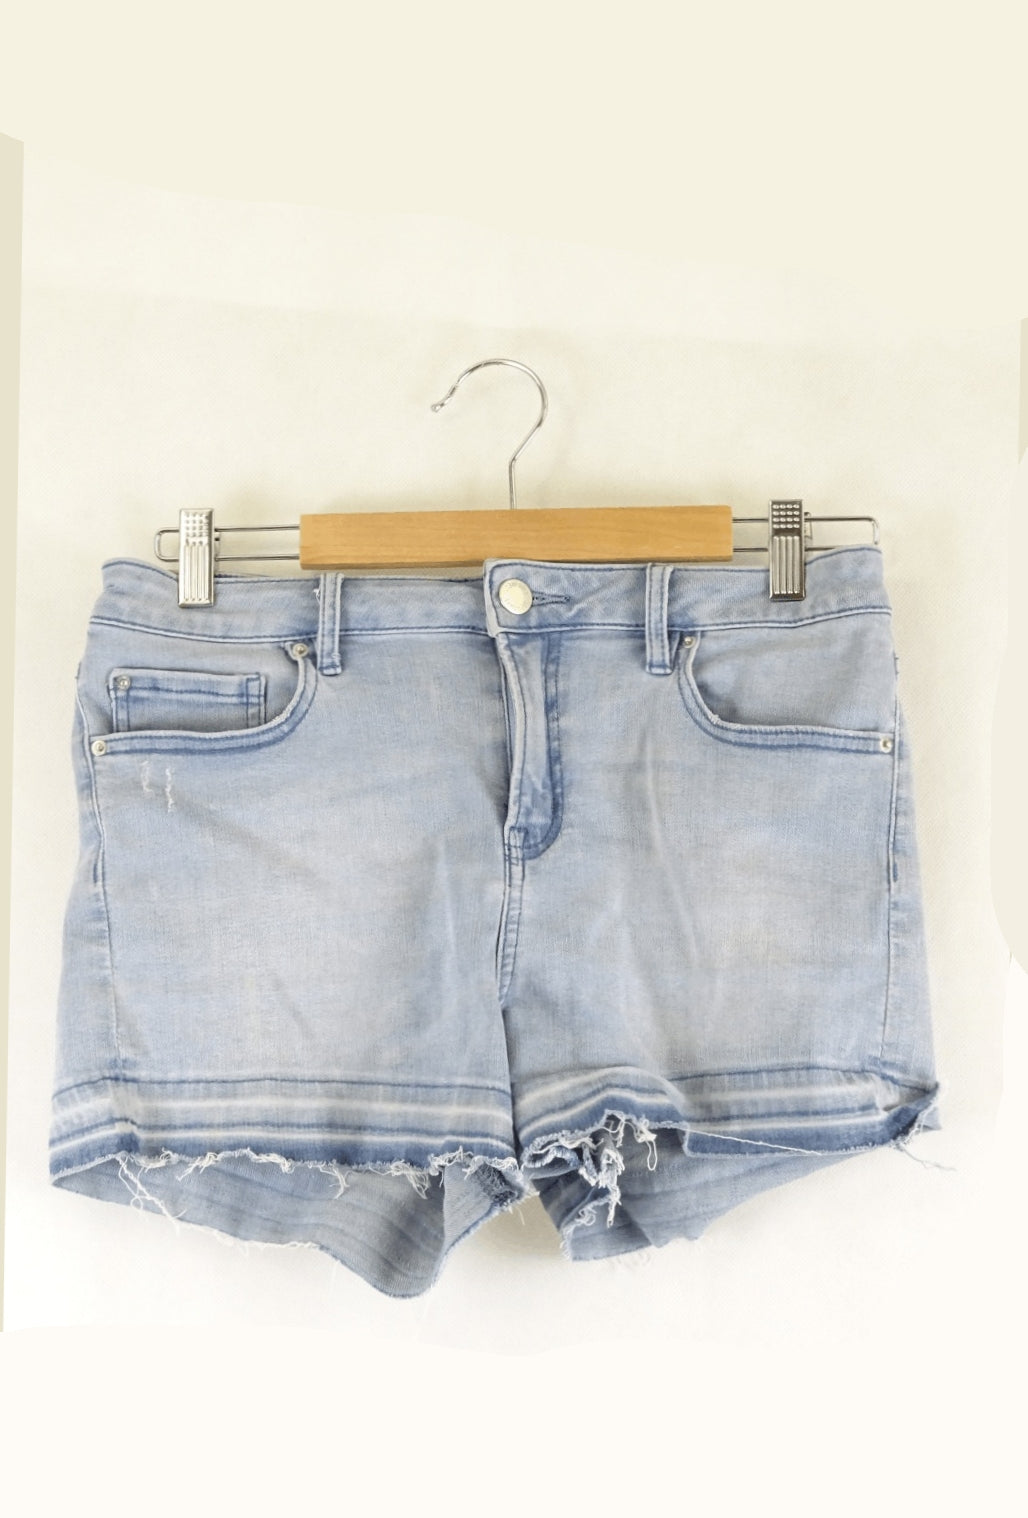 Jeanswest Shorts 10